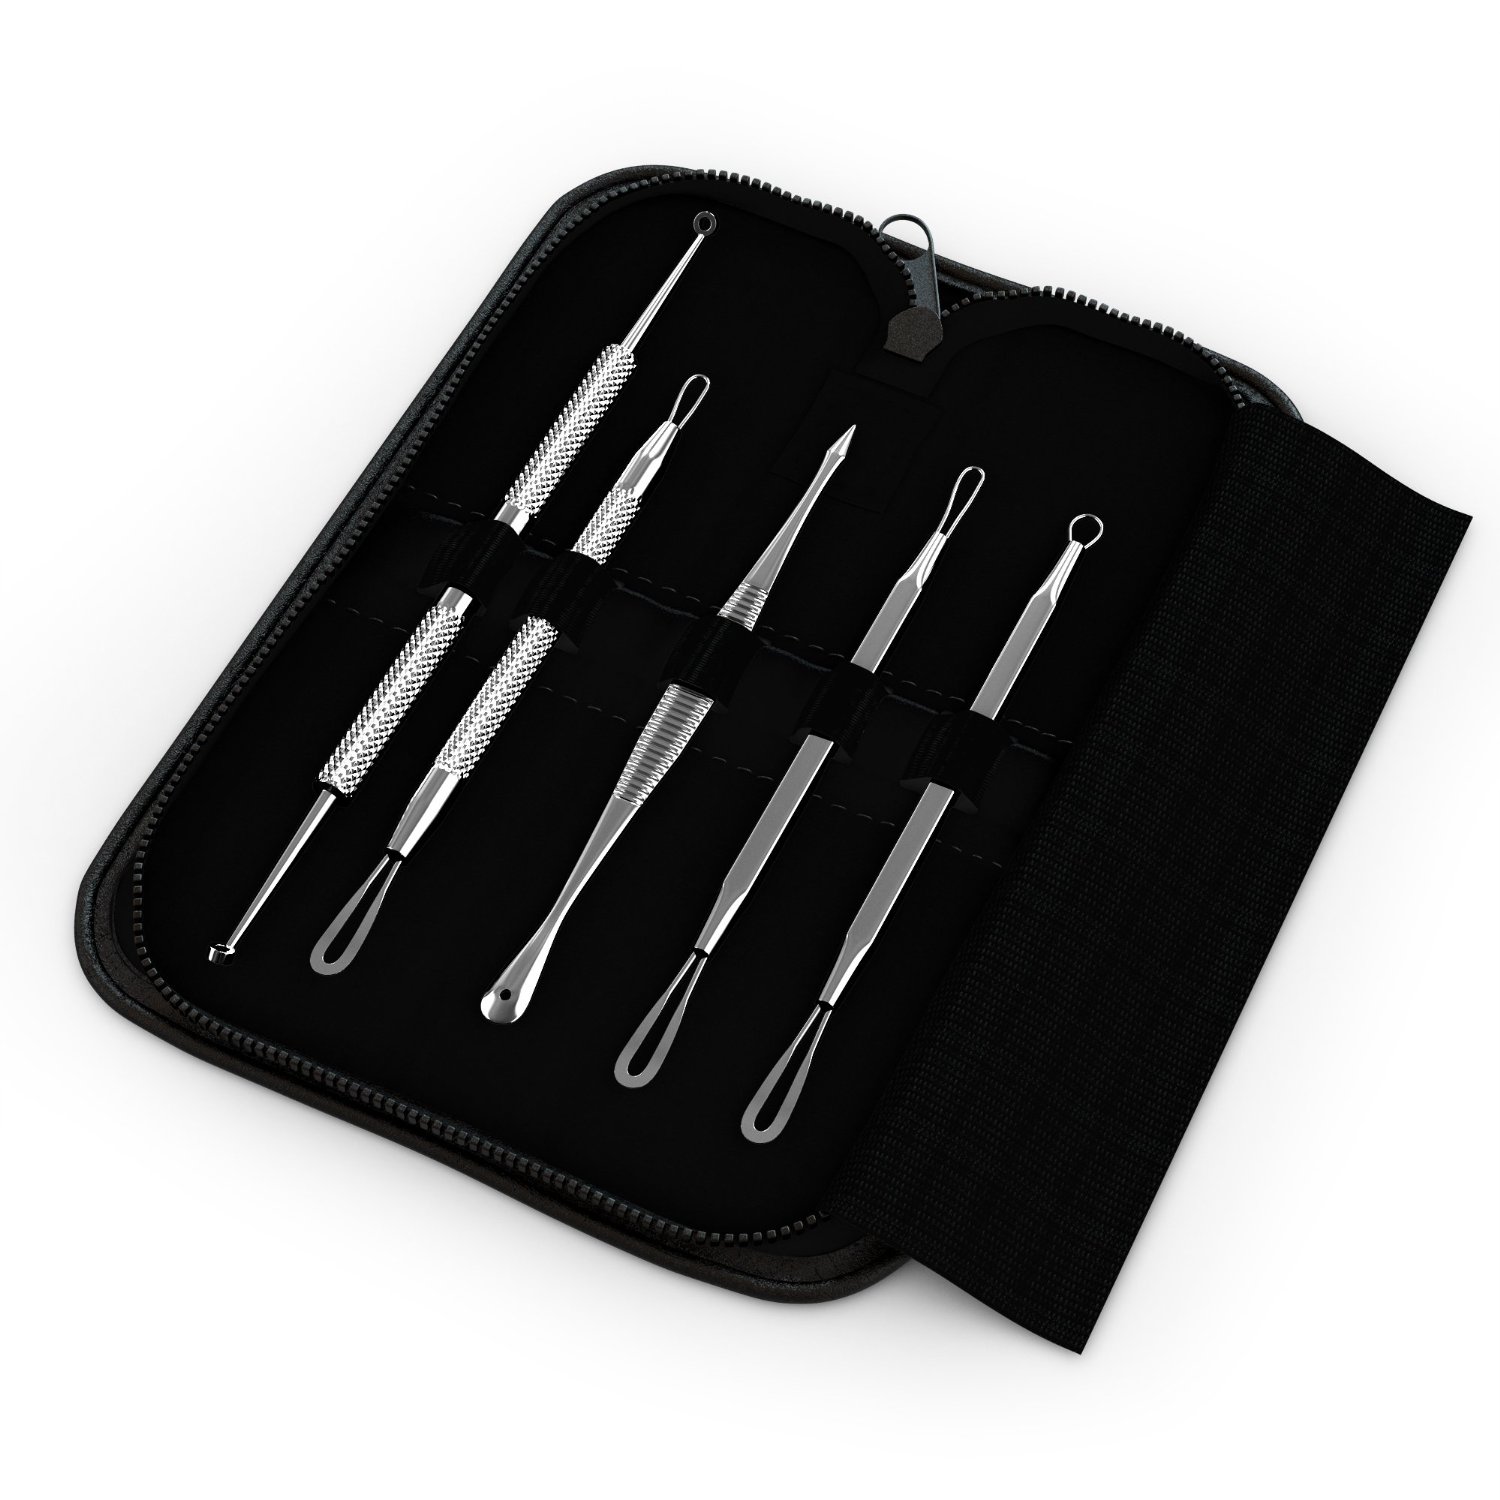 Blackhead Acne Comedone Pimple Blemish Extractor Remover Stainless Tool Kit, 5 Pieces - image 1 of 4